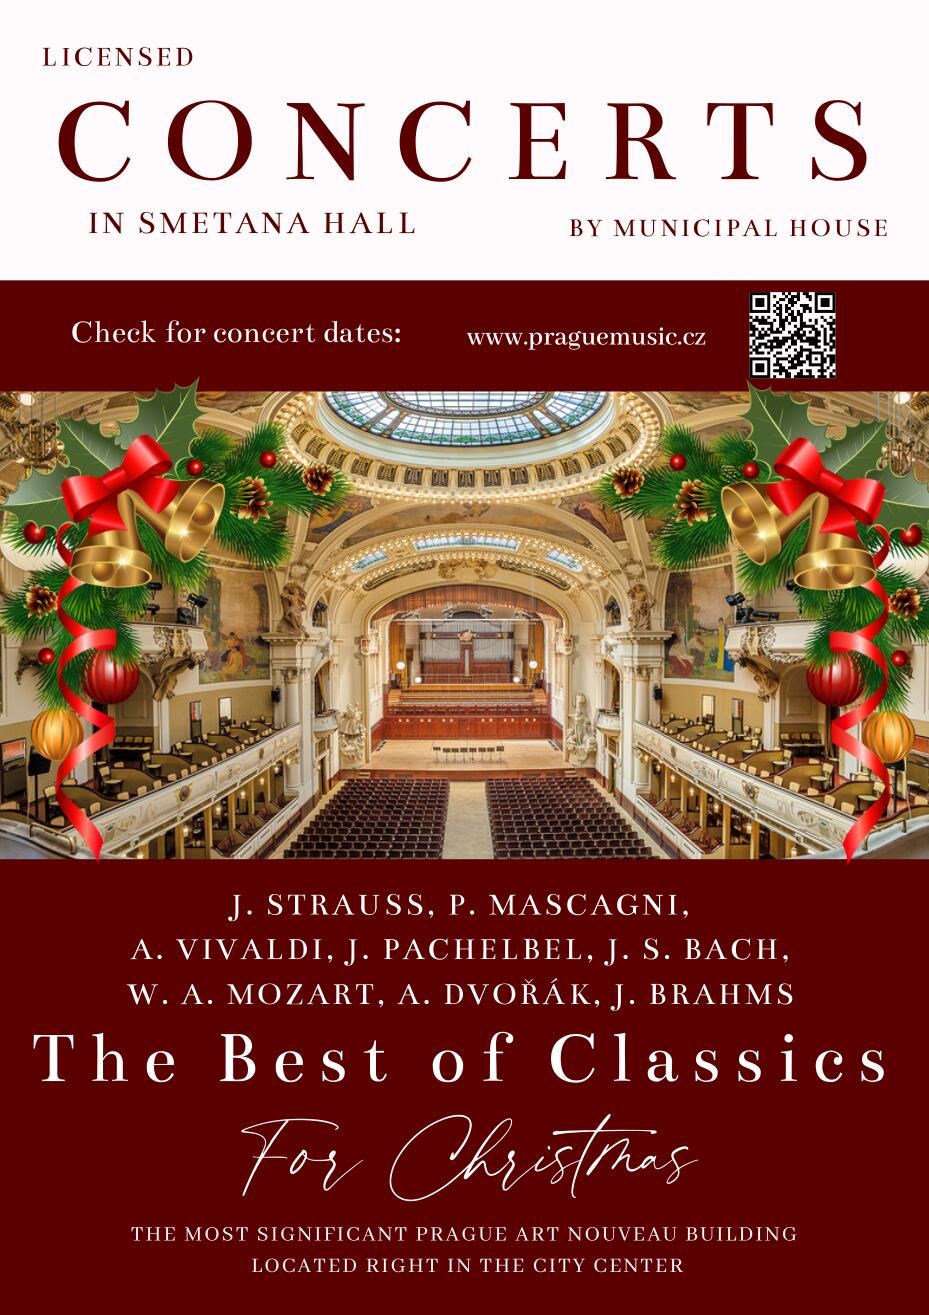 The Best of Classics for Christmas